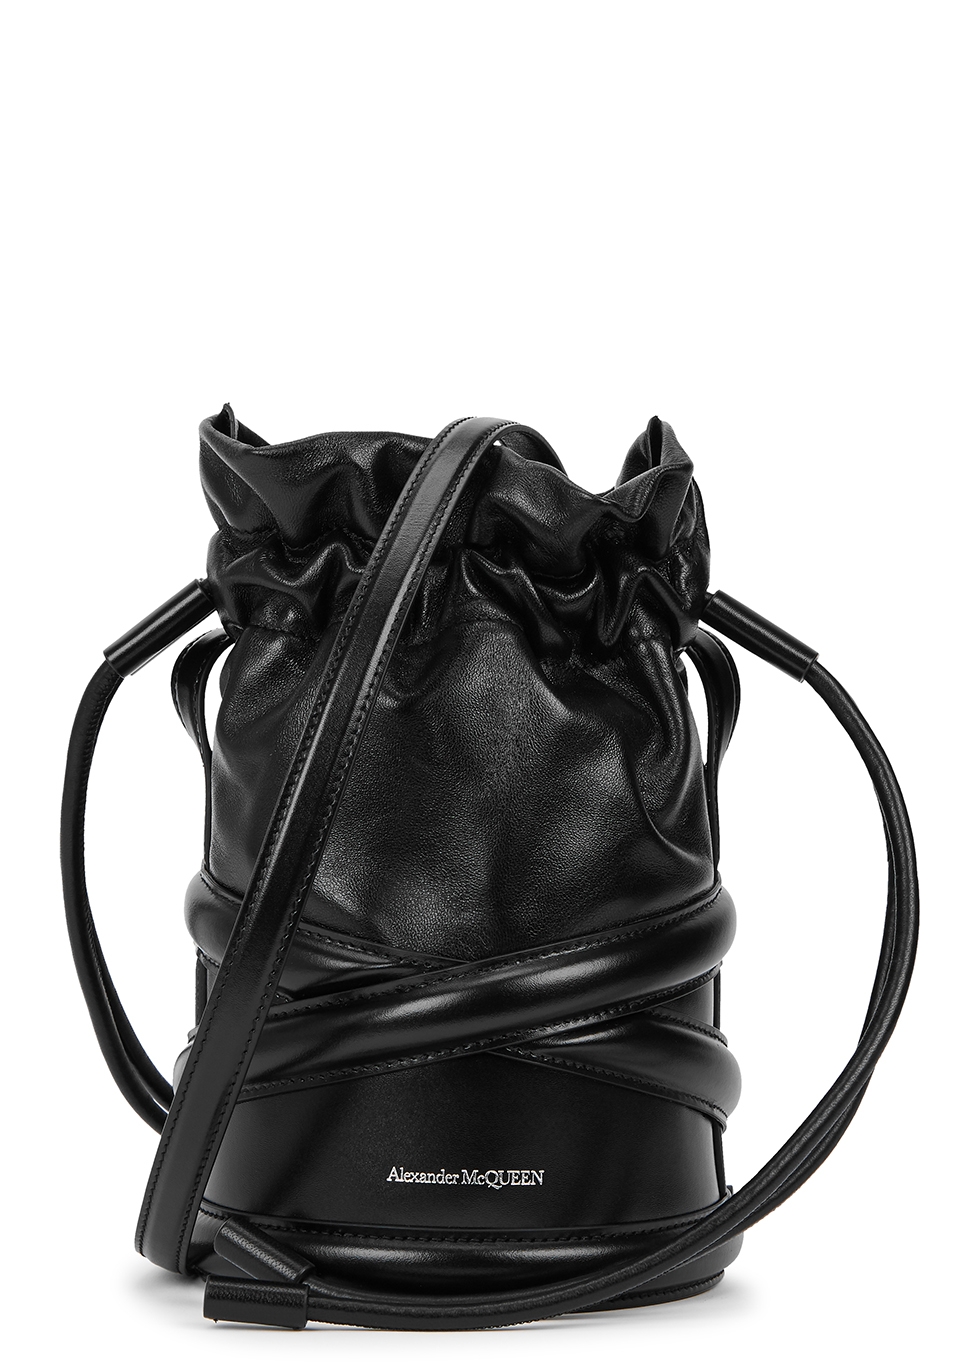 The Soft Curve small black leather bucket bag